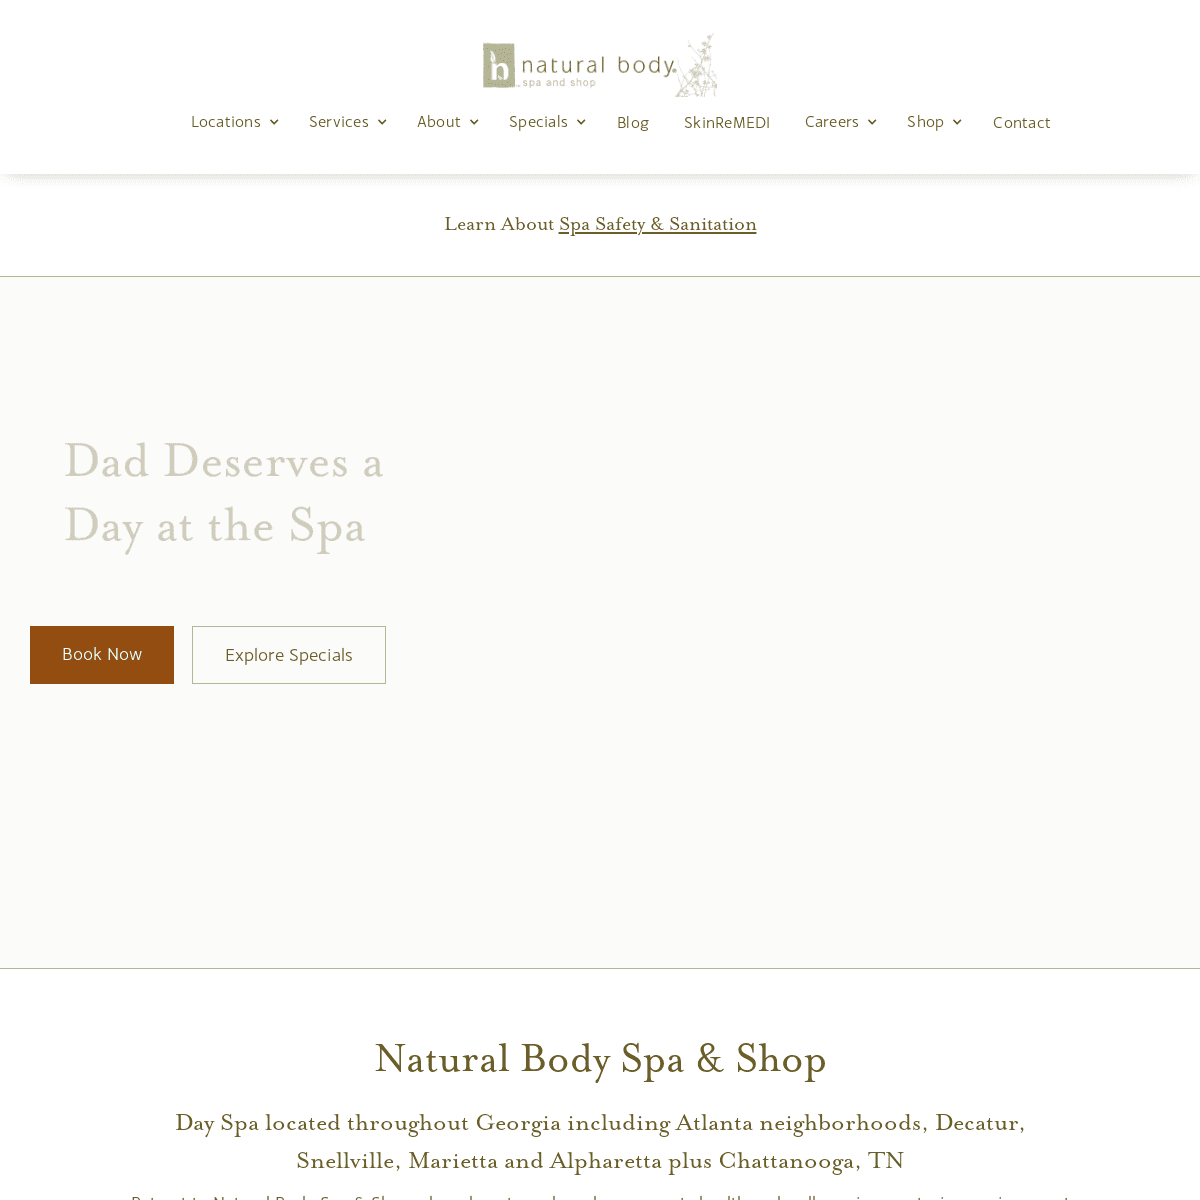 A complete backup of https://naturalbody.com